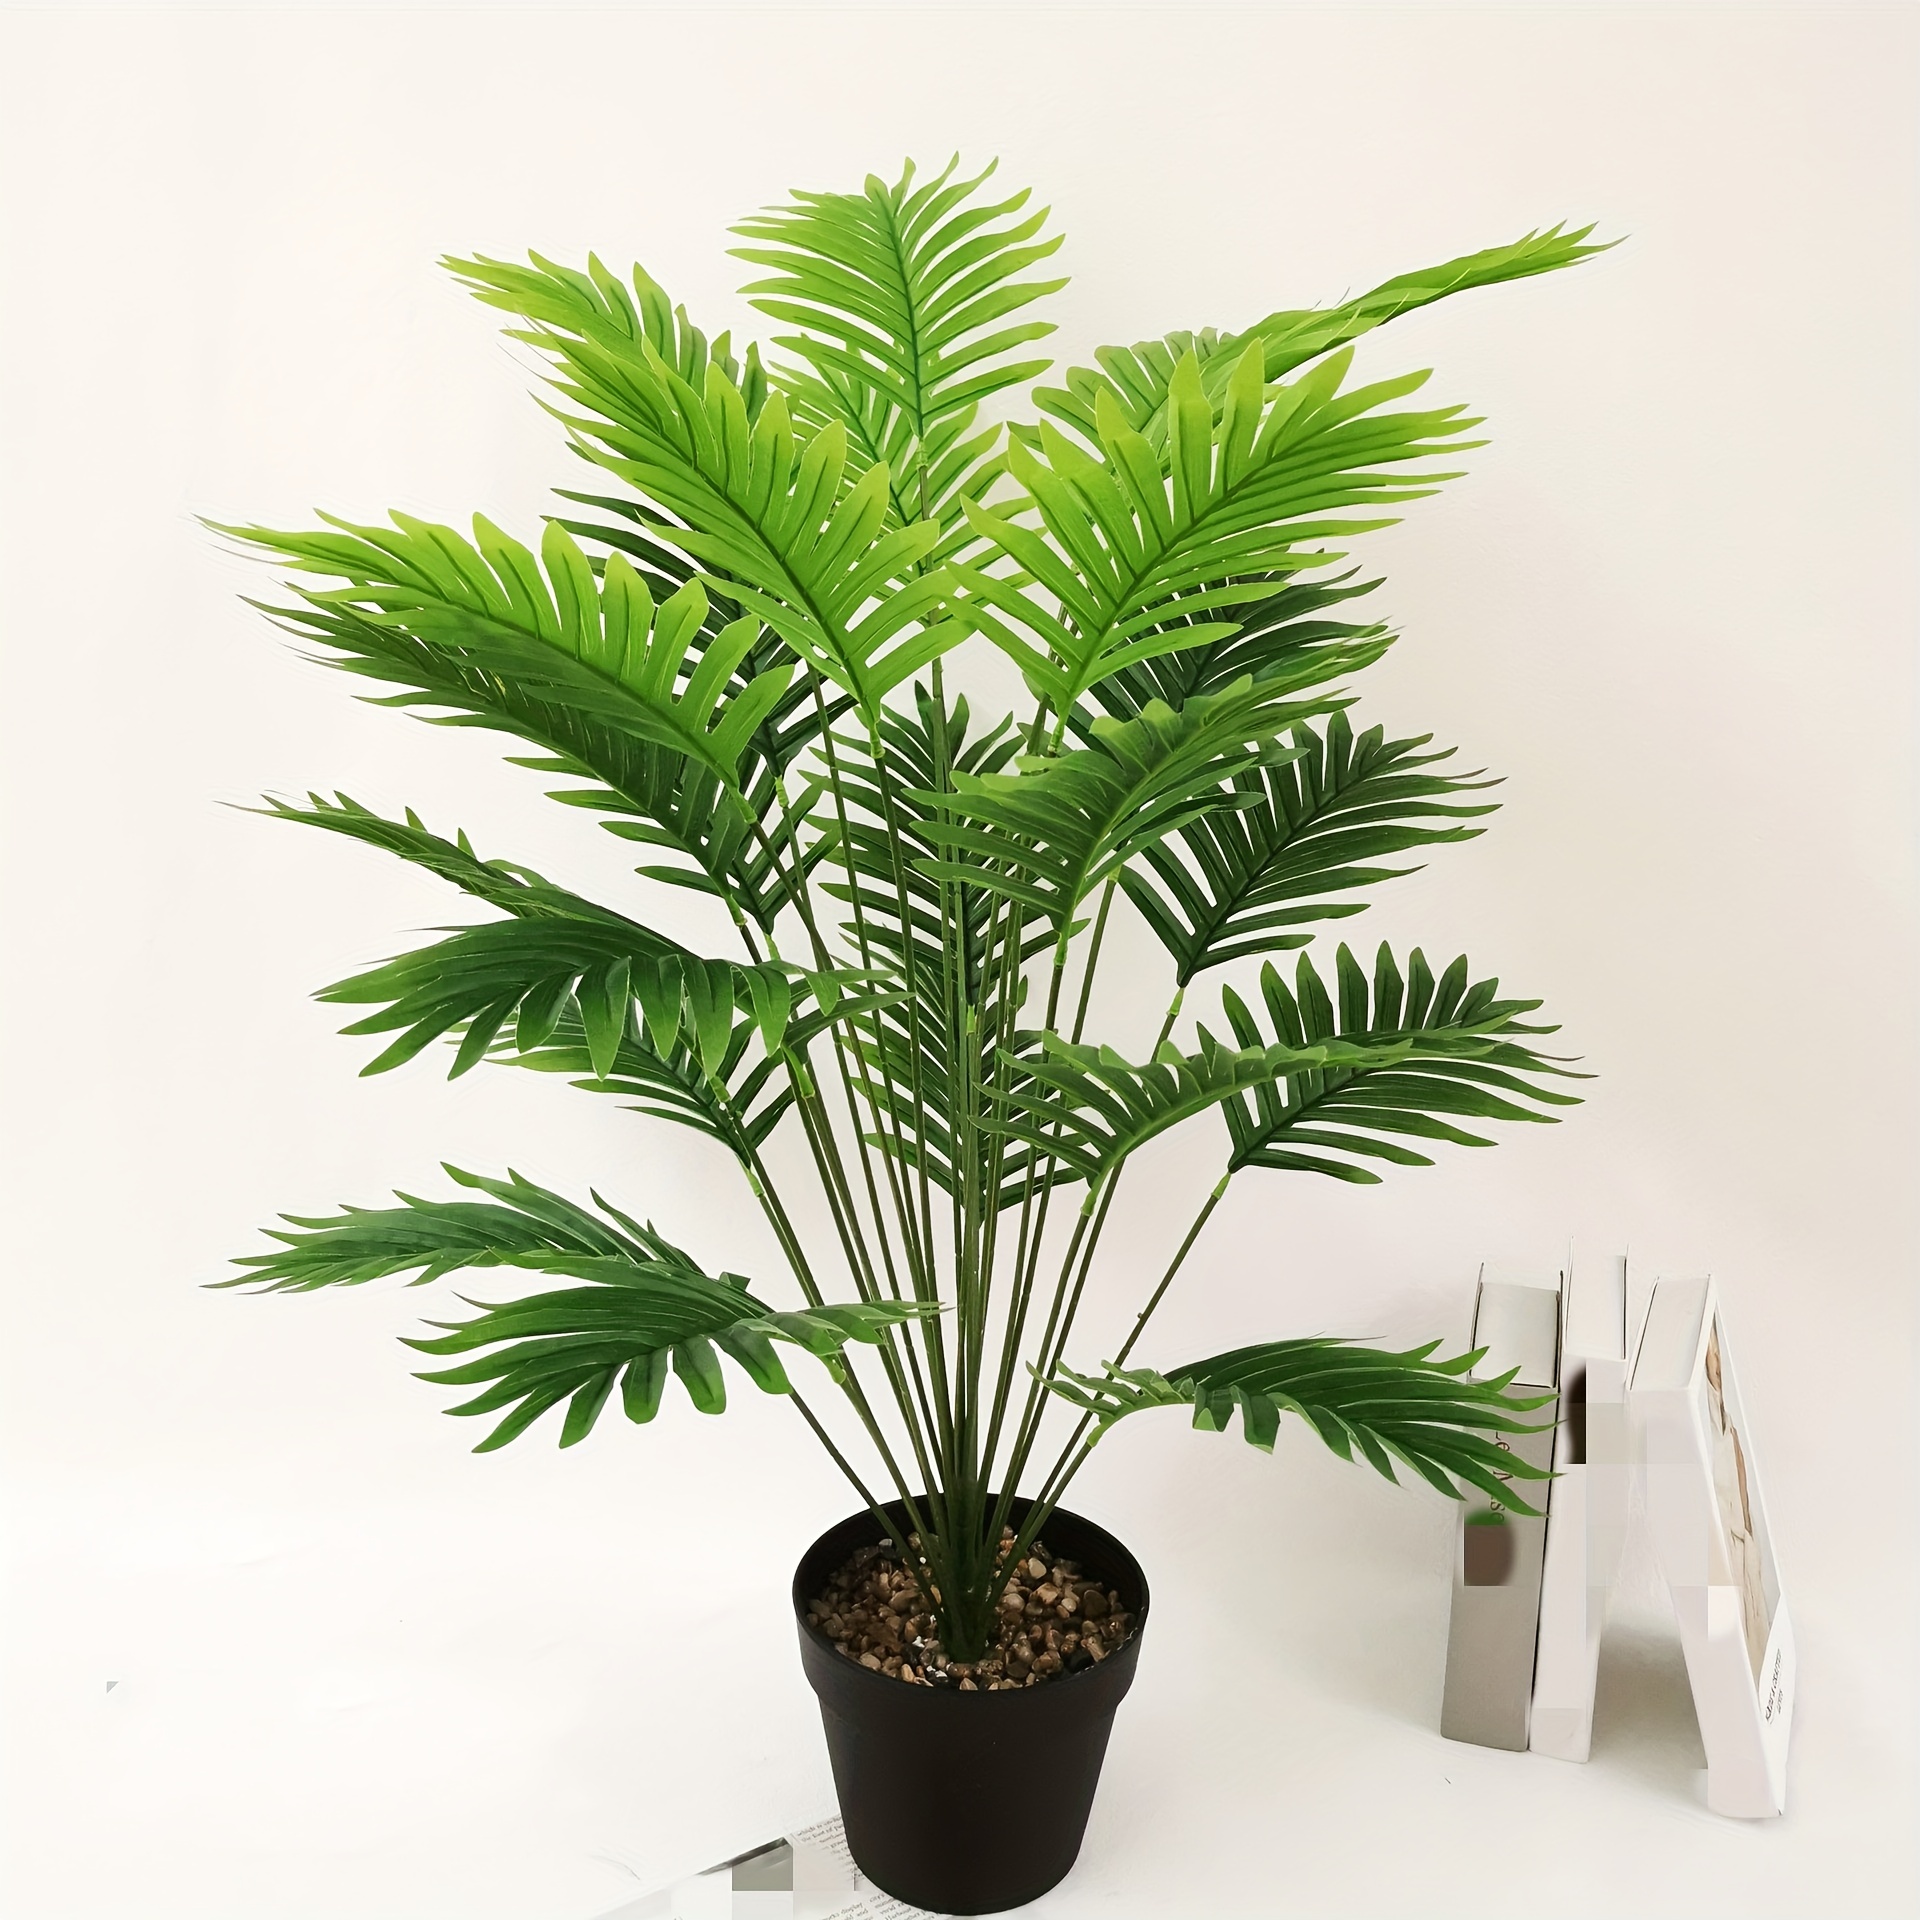 Amazon.com: Fopamtri Artificial Areca Palm Plant 3.6 Feet Fake Palm Tree  with 10 Trunks Faux Tree for Indoor Outdoor Modern Decor Feaux Dypsis  Lutescens Plants in Pot for Home Office, Decor Pot